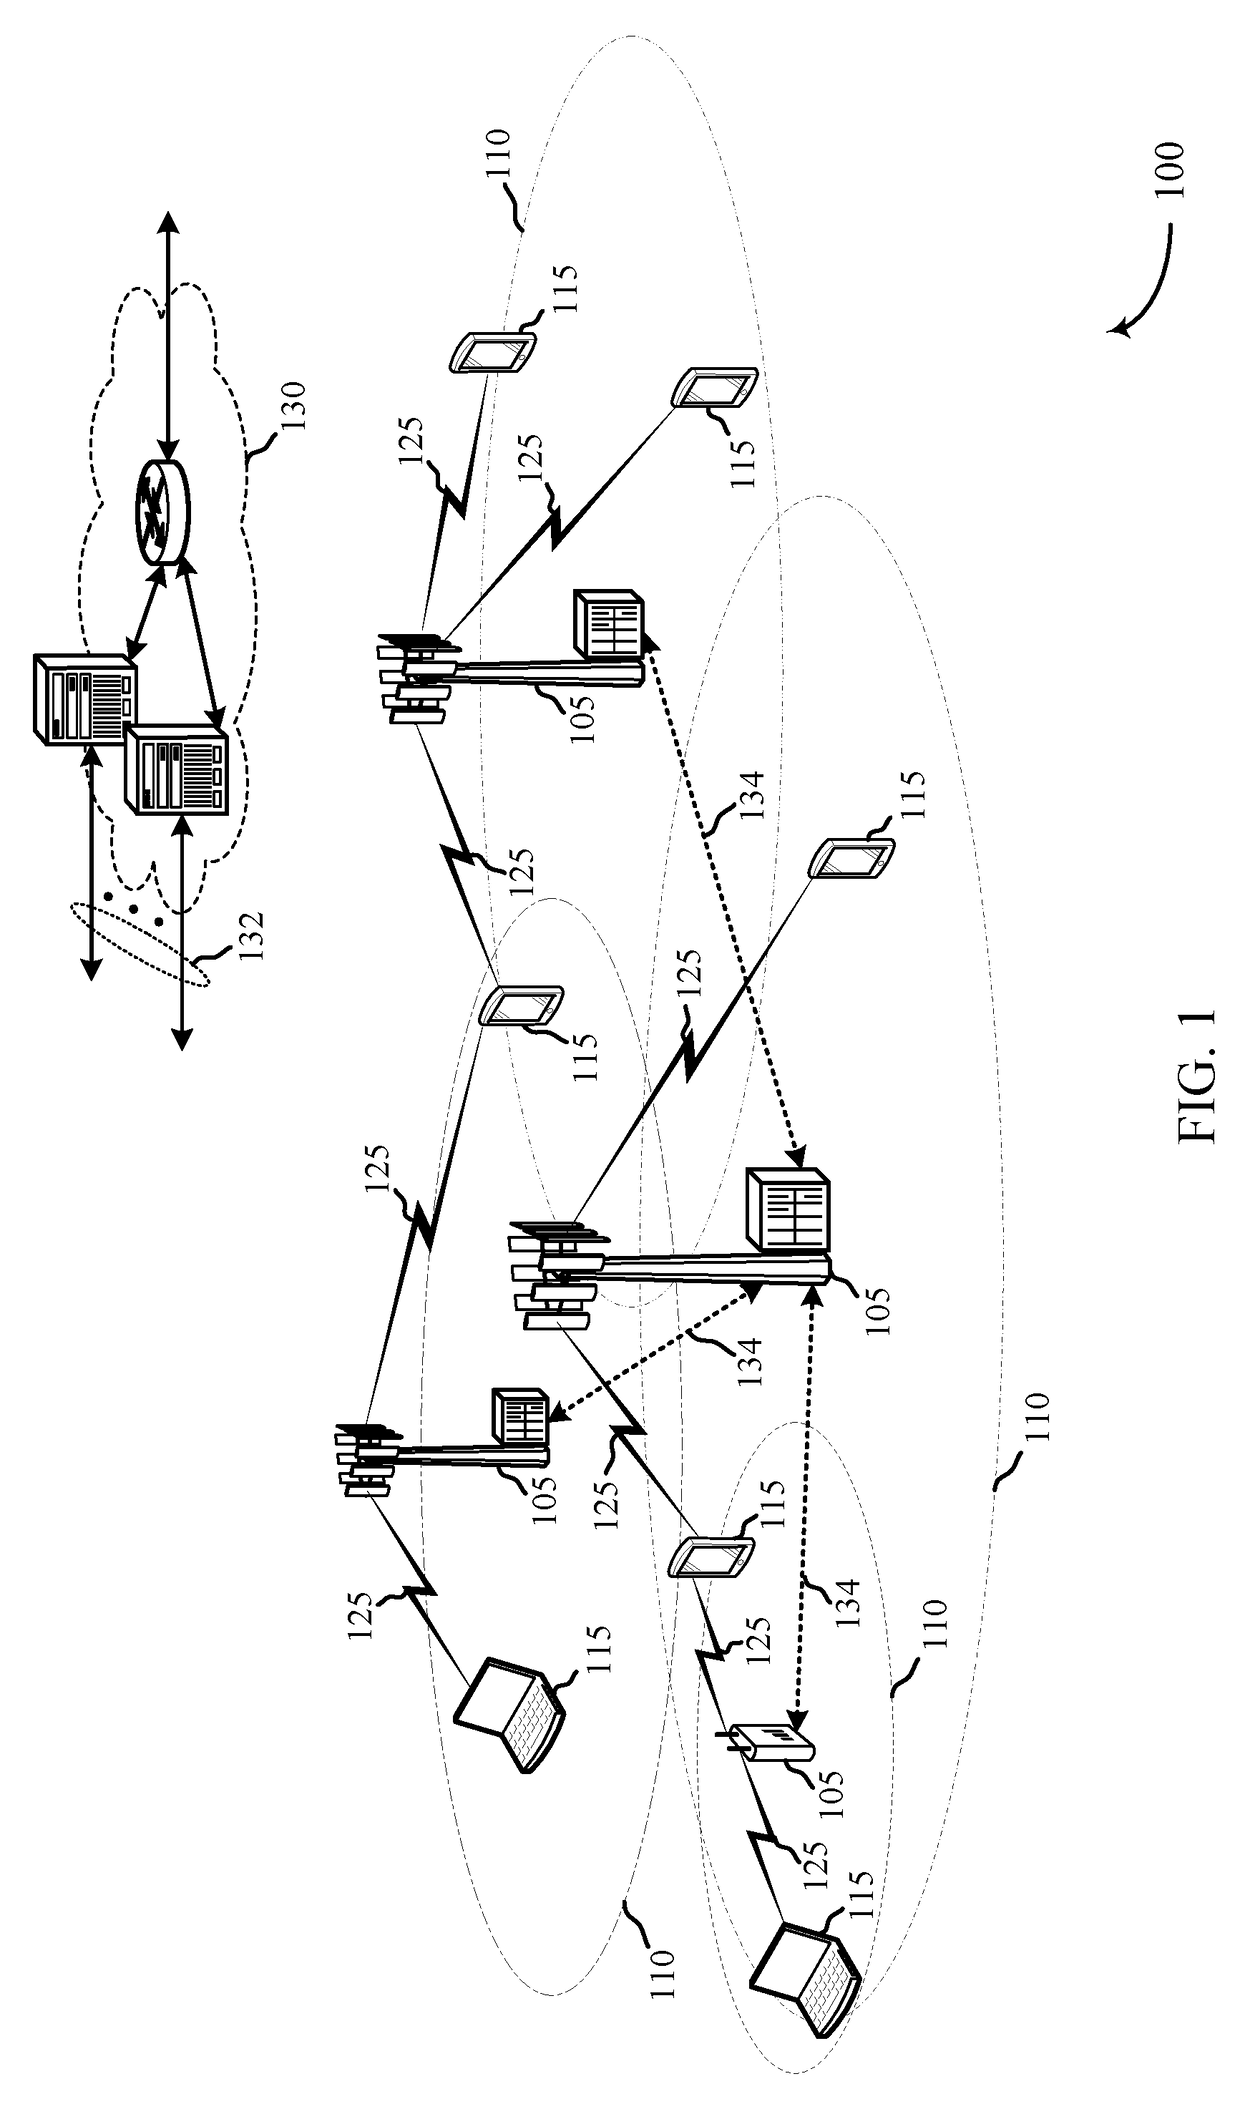 Techniques for performing a random access procedure in an unlicensed spectrum